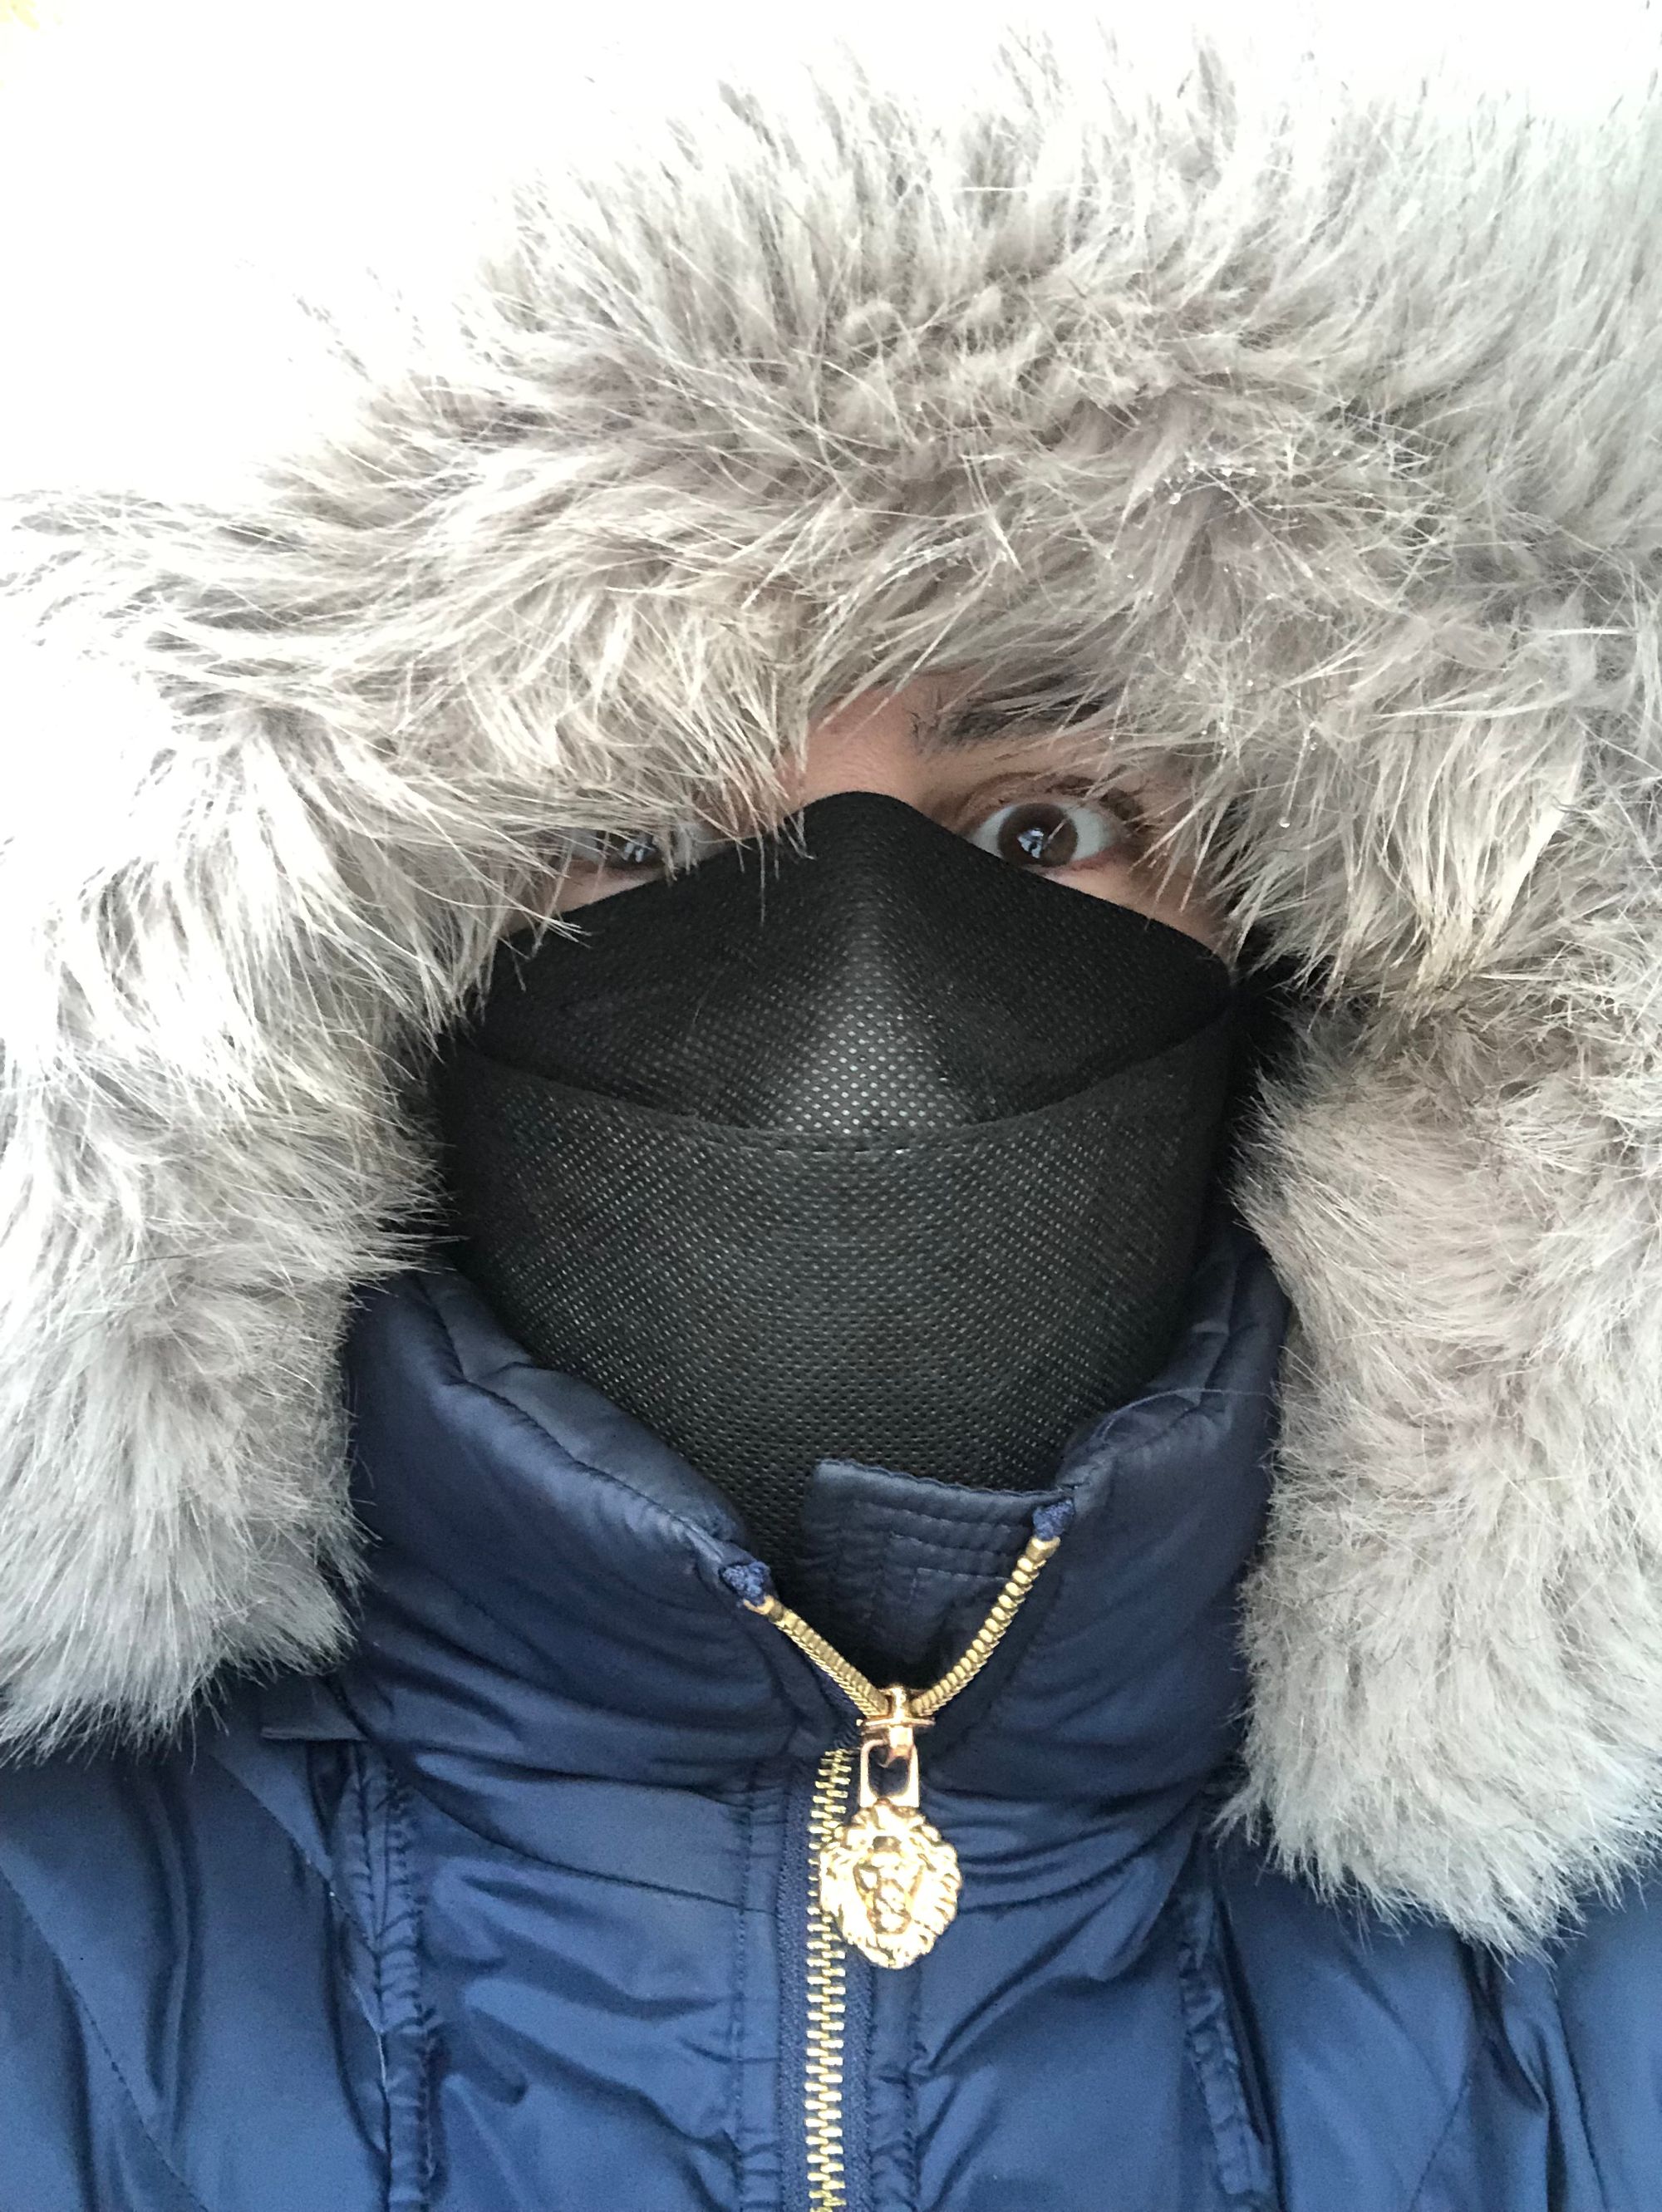 Selfie in which I'm wearing a black KF94 mask and a dark blue winter coat with a hood extravagantly lined with synthetic fur. My whole face is obscured except for one brown eye on the right side of the photo. 